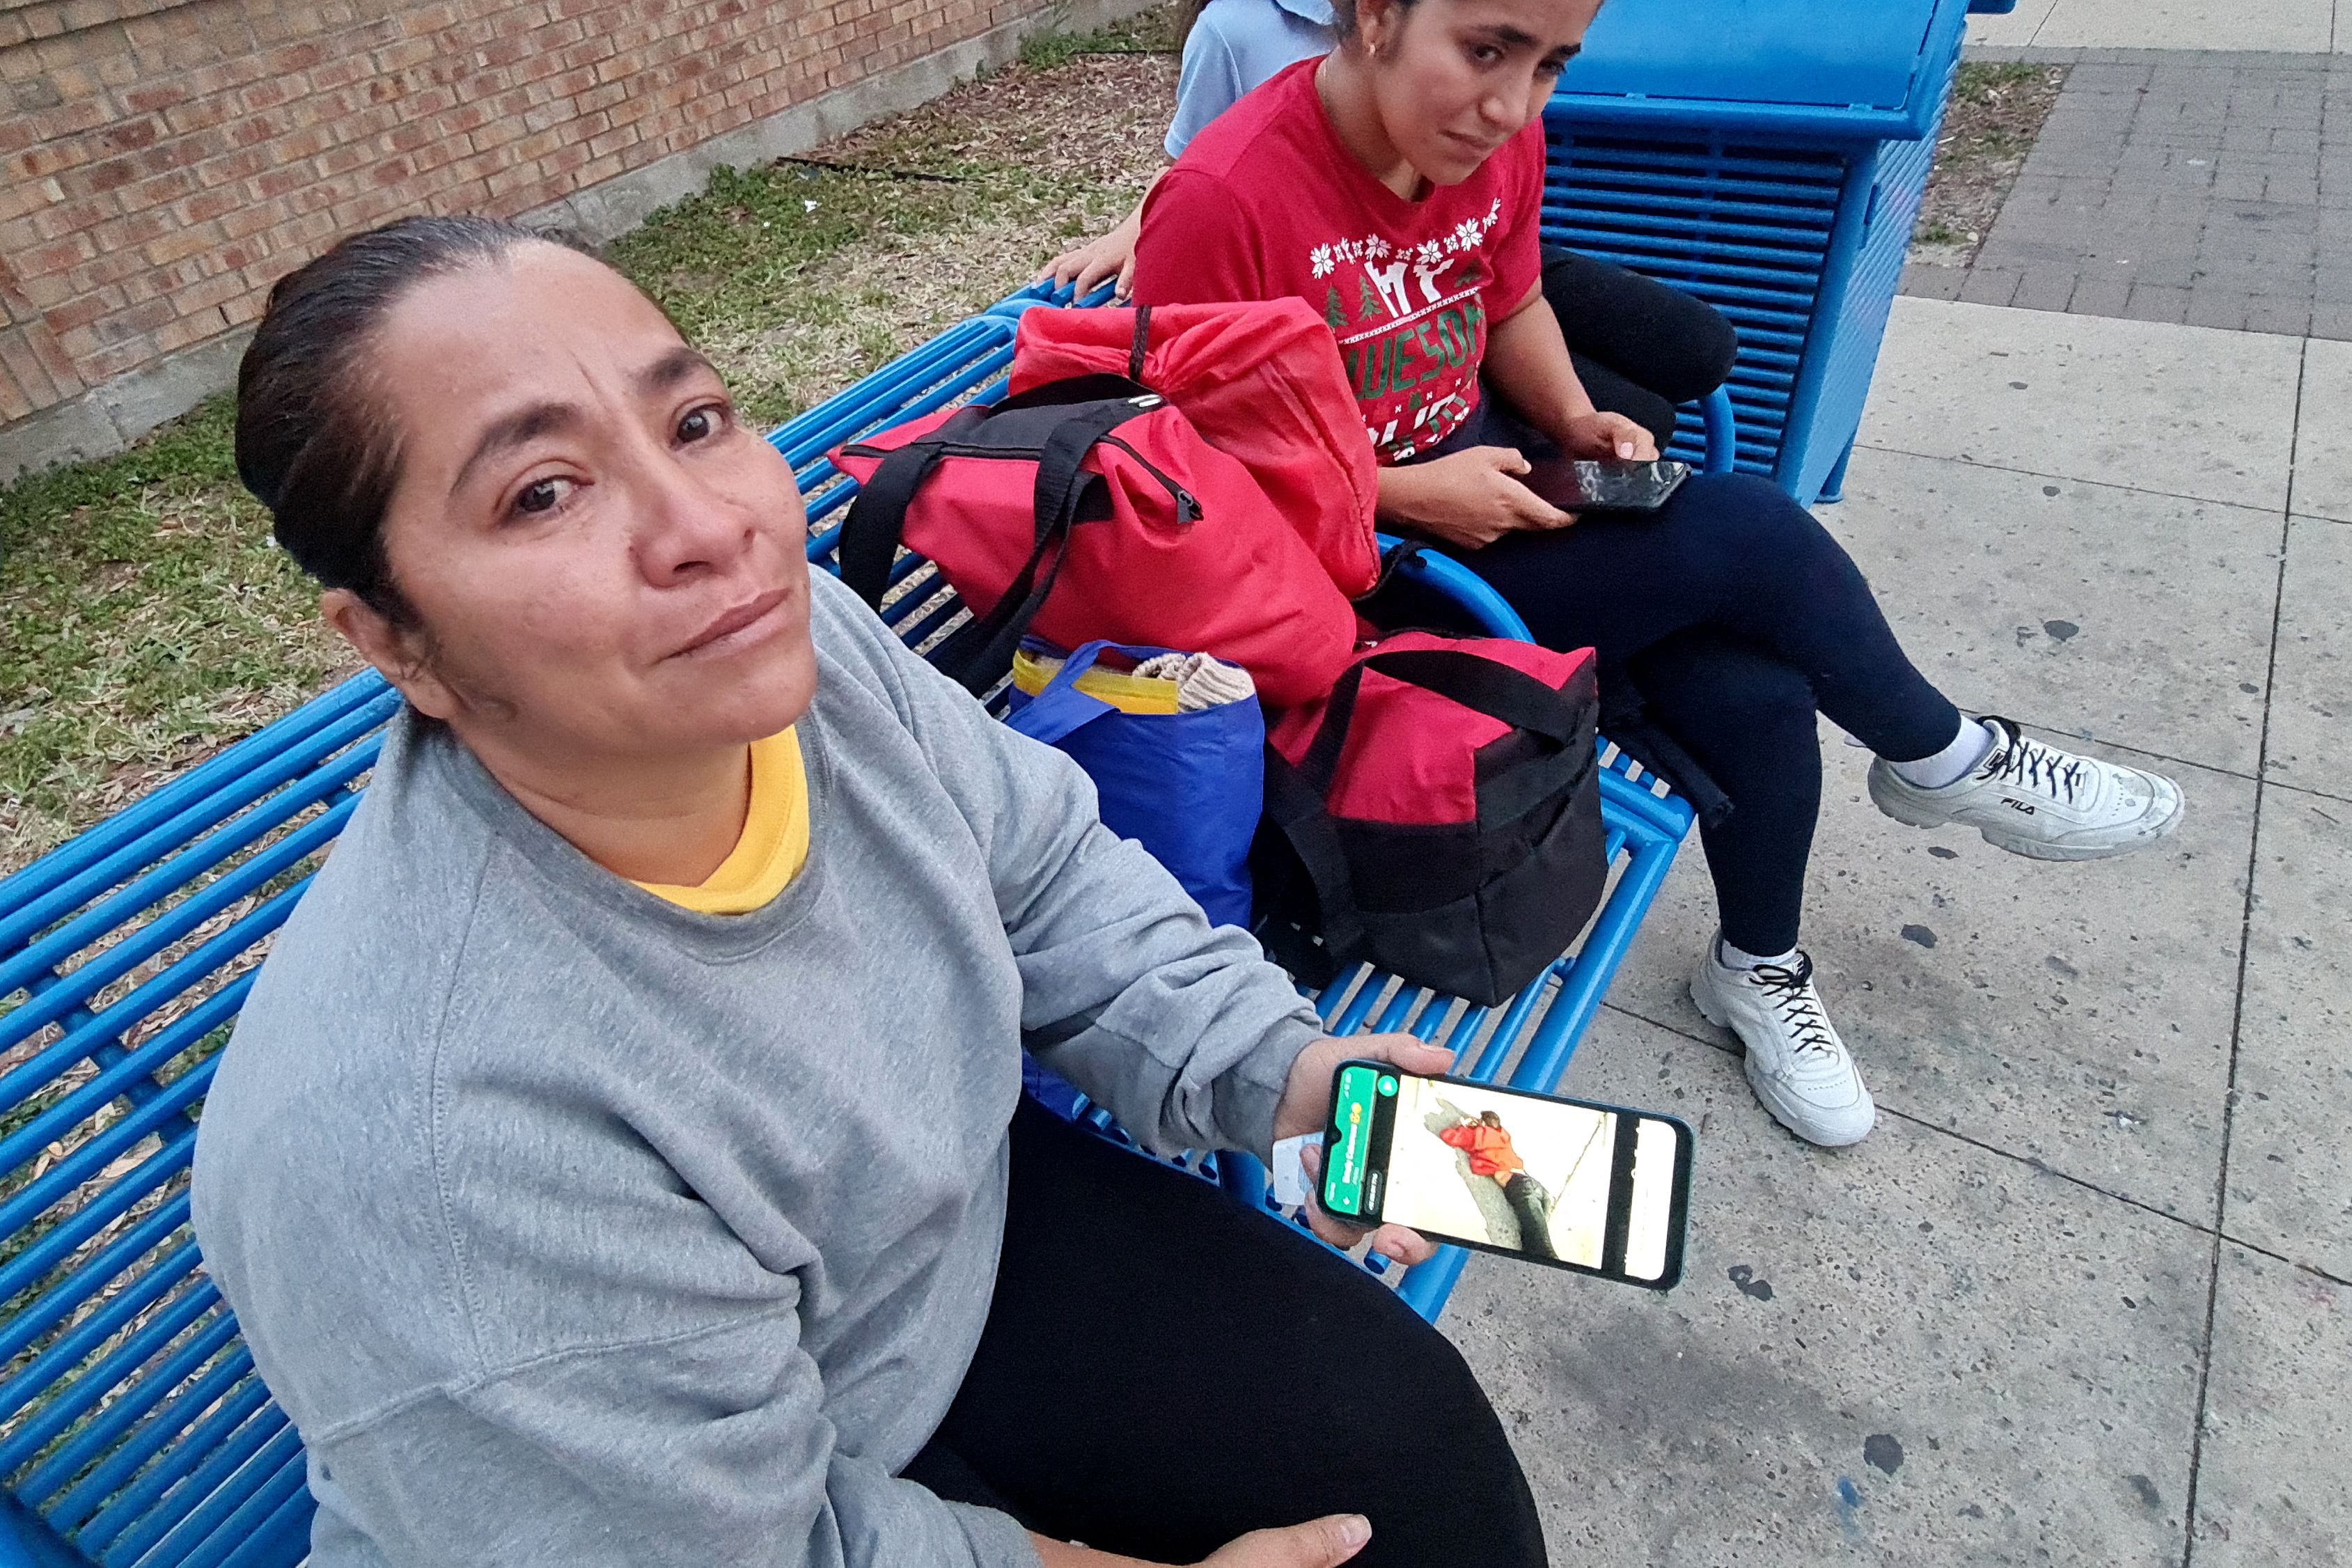 Venezuelan Maria Cabarcas (L), 43, holds her phone with the picture of who she believes is her deceased son, Enyerbeth Cabarcas, 23, who allegedly was one of the eight victims after an SUV plowed into a crowd, in Brownsville, Texas on 8 May 2023